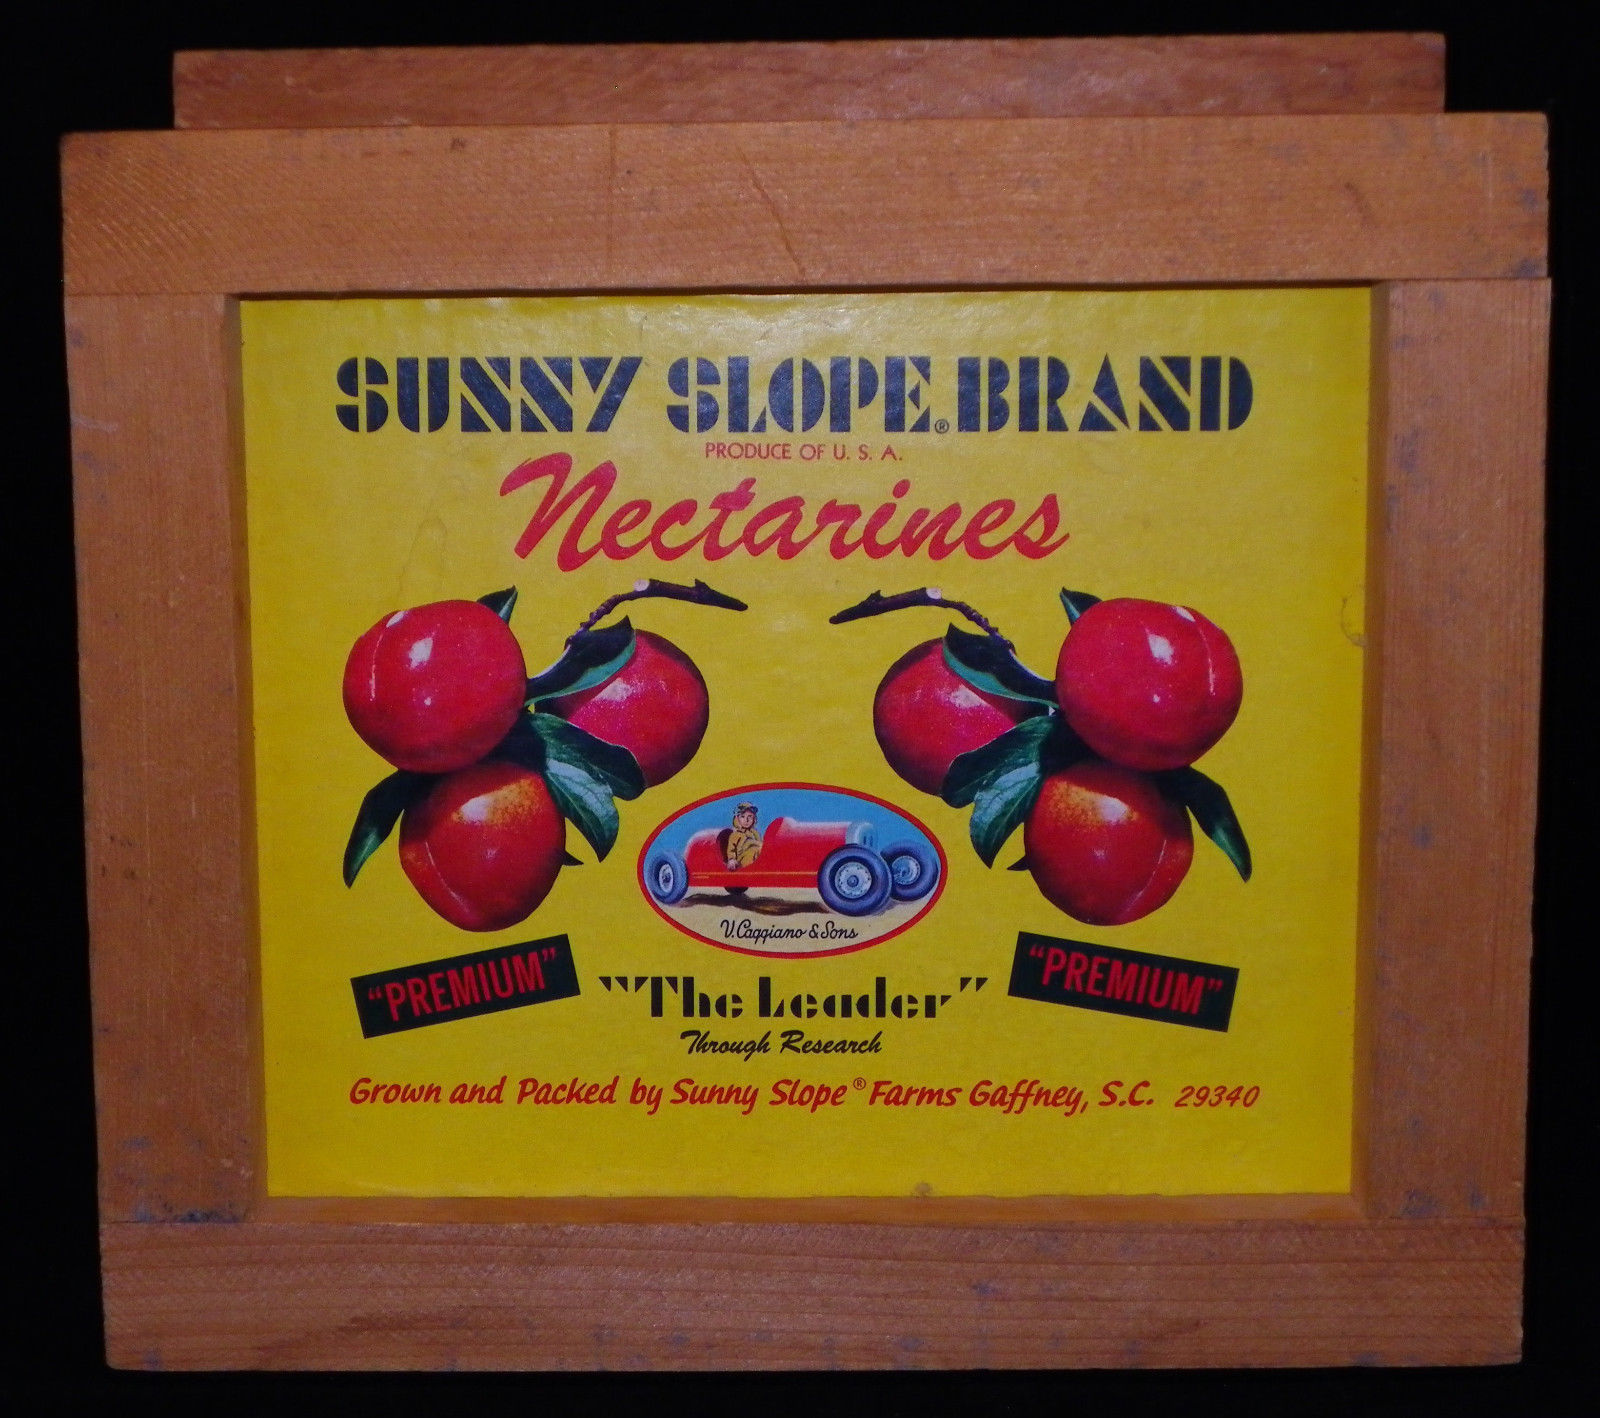 Sunny Slope Brand Nectarines Wooden Crate End Colorful Yellow "The Leader" - $9.99